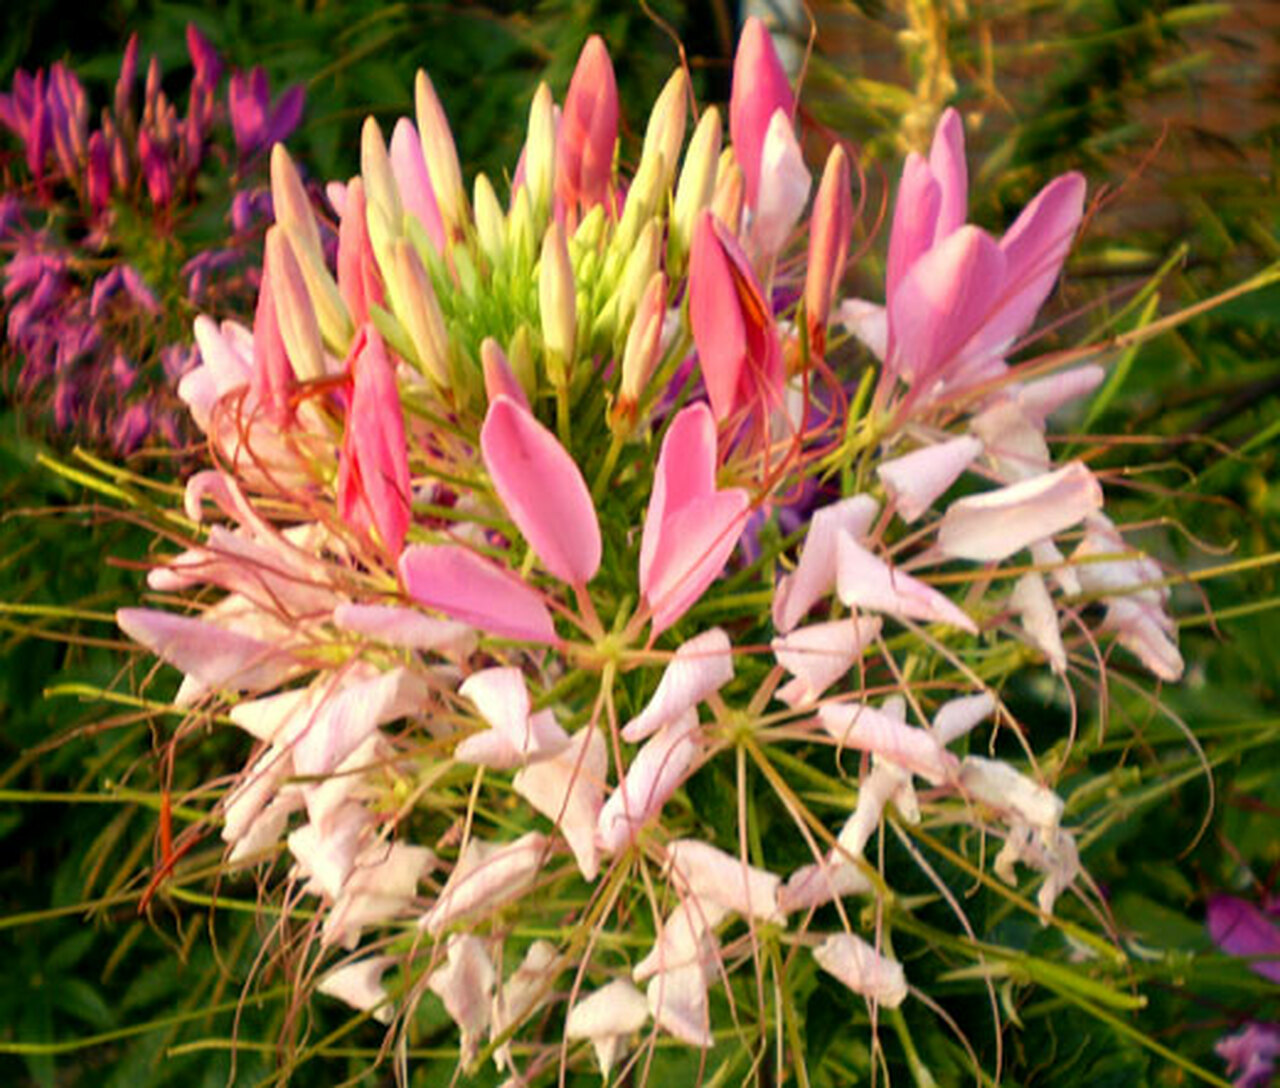 Cleome-Hassleriana. Top 10 Flowers That Look Like Fireworks